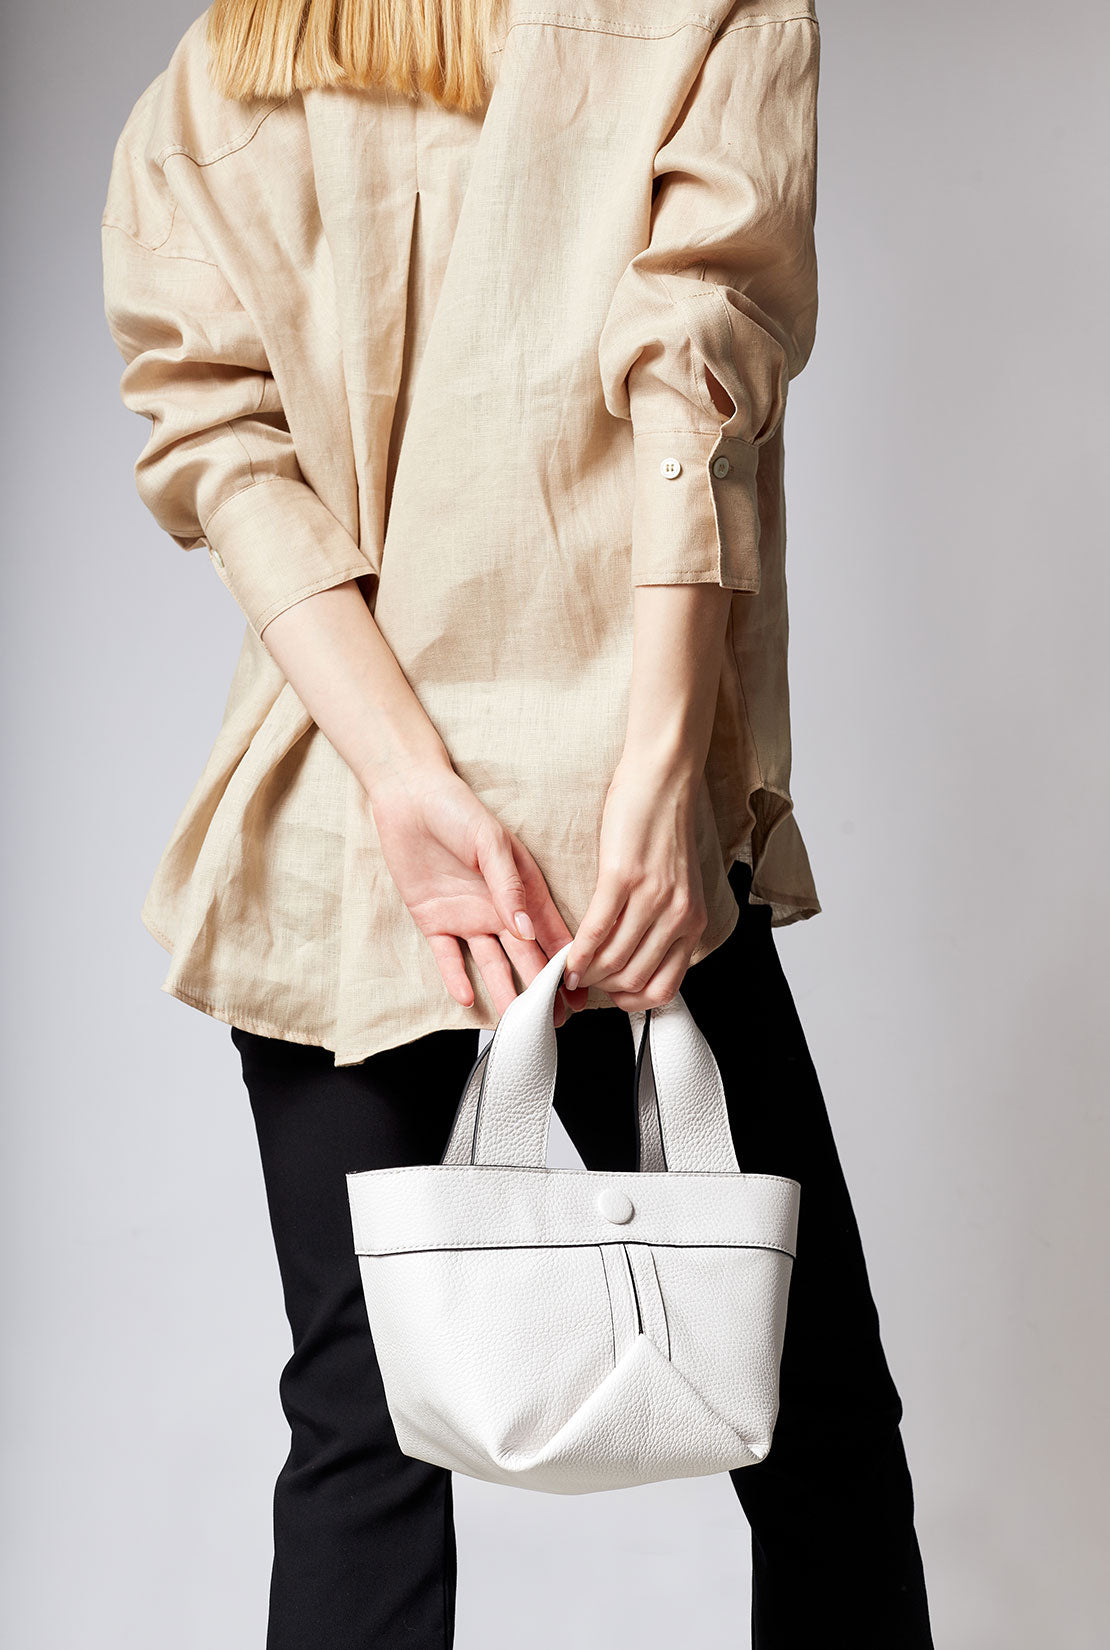 Gusset small pebble leather tote in white with black edge paint